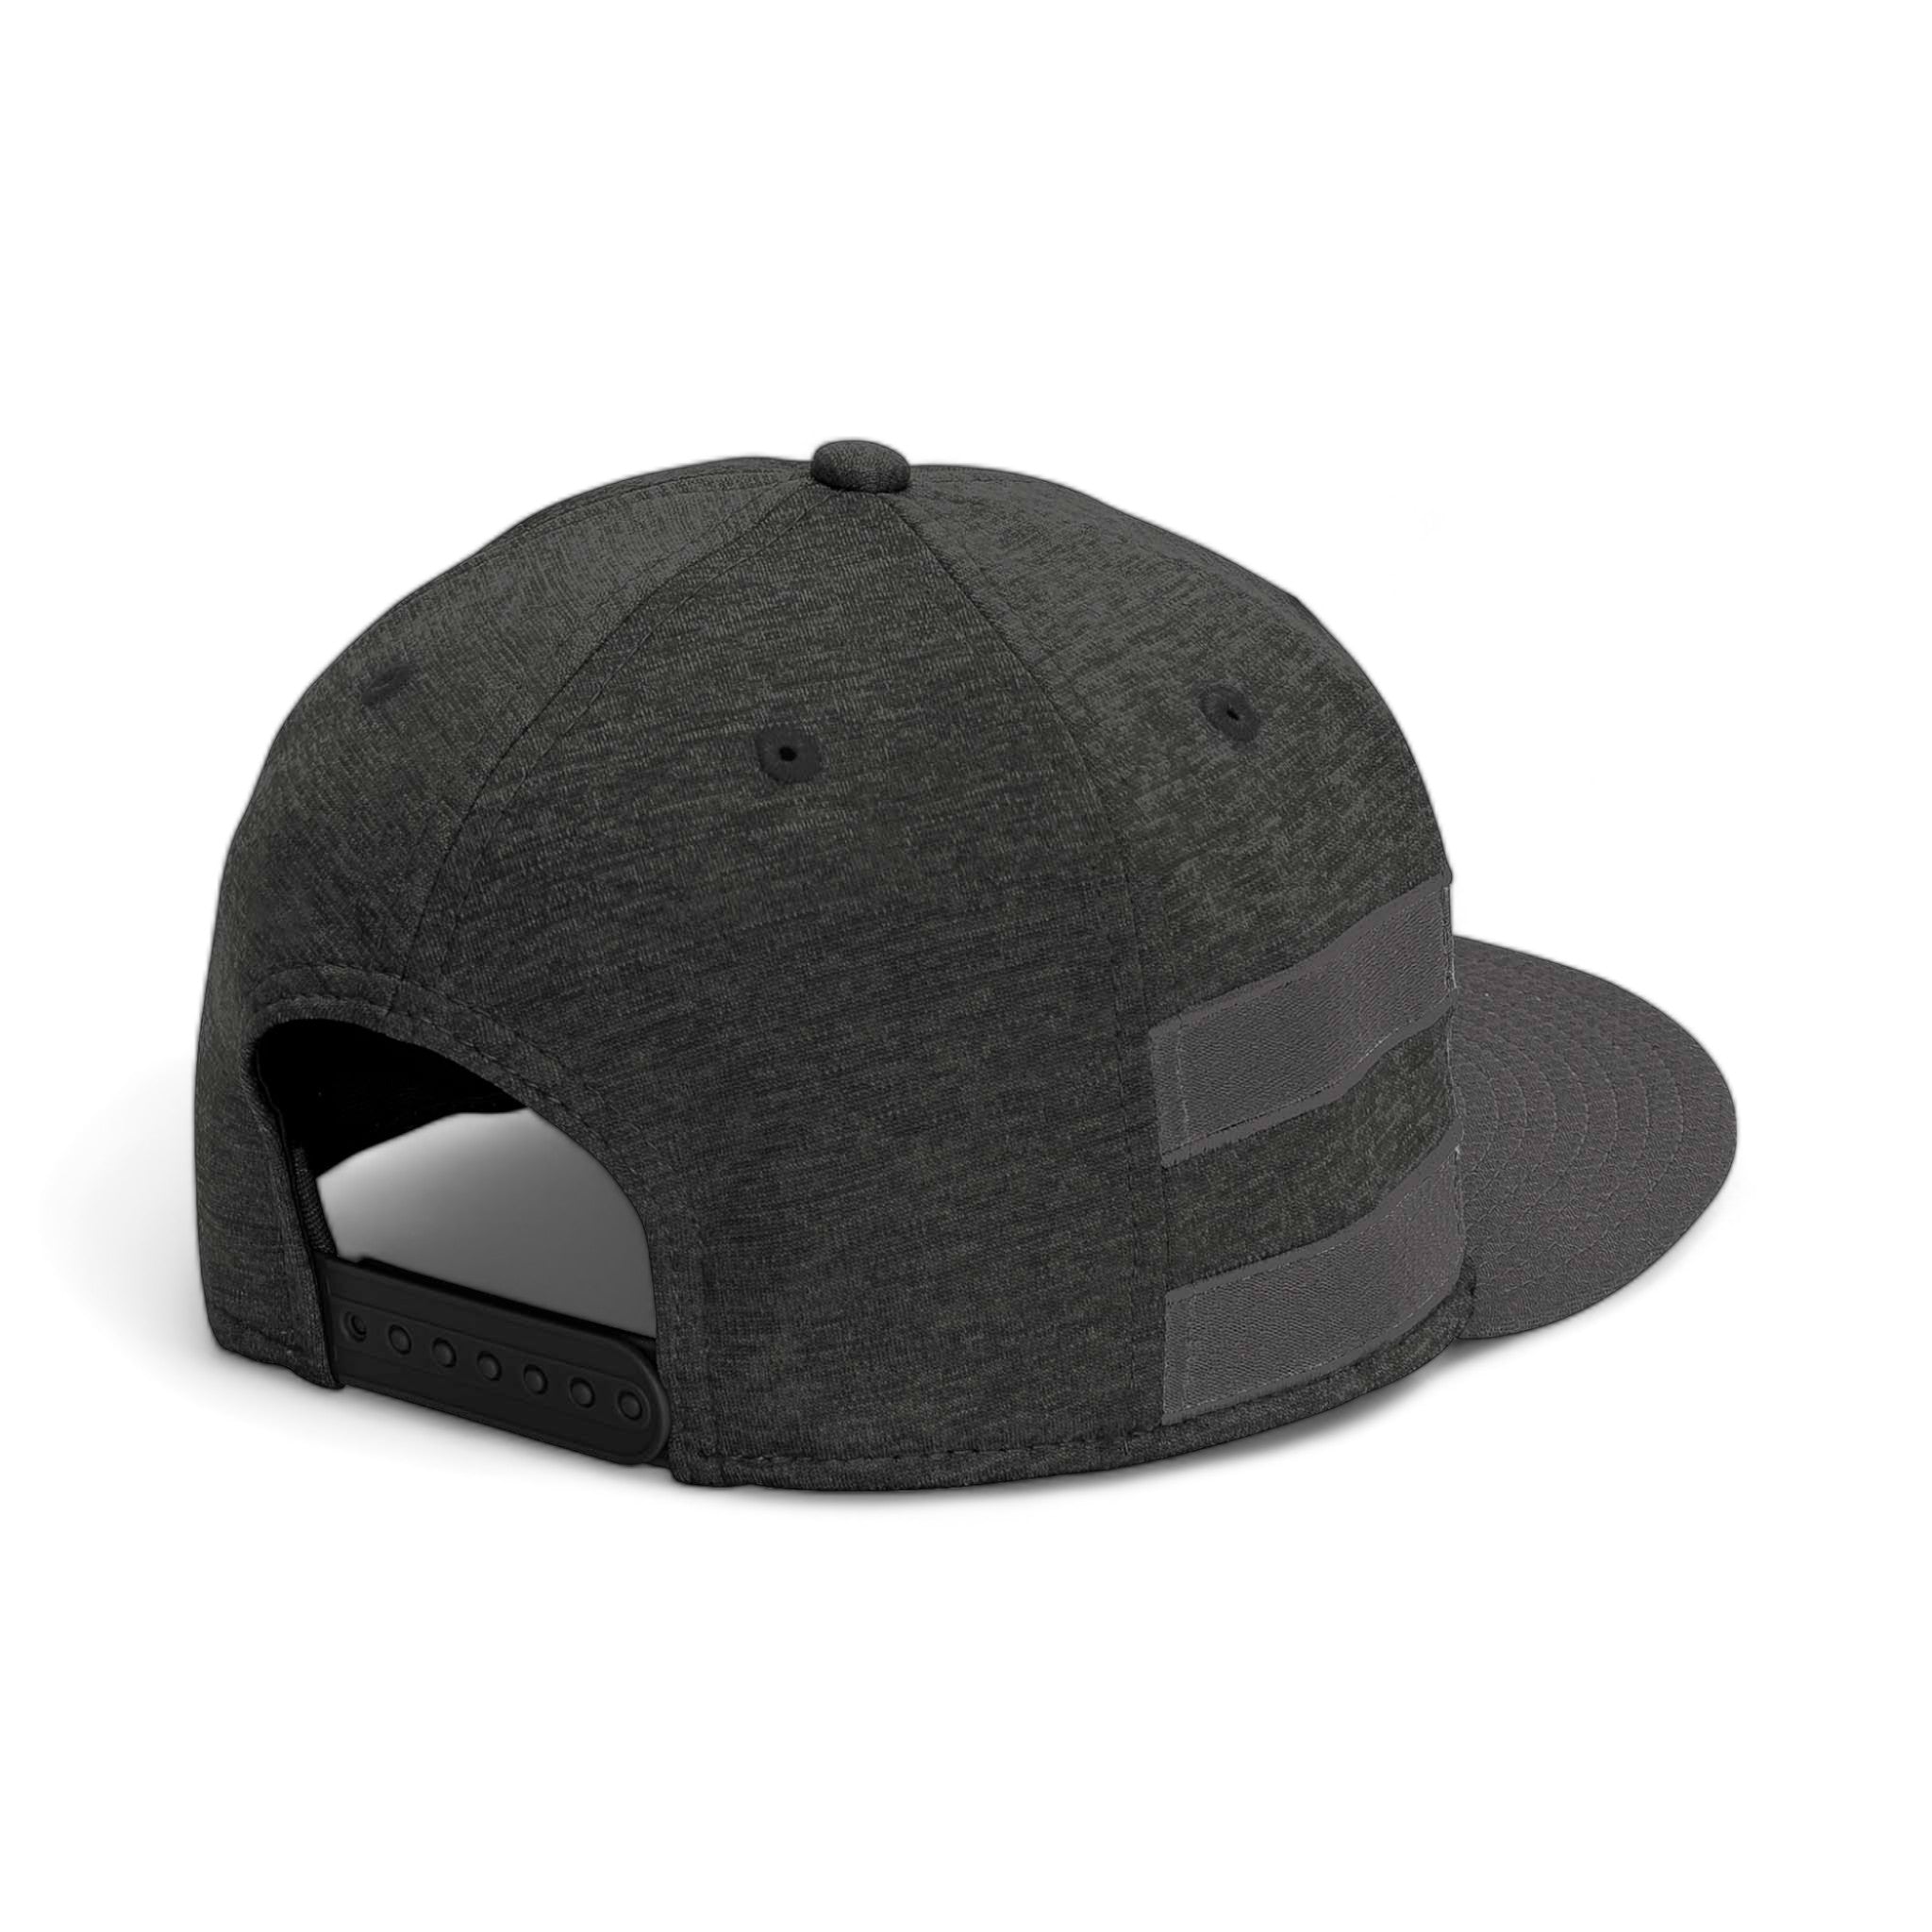 Back view of New Era NE408 custom hat in black shadow heather and graphite